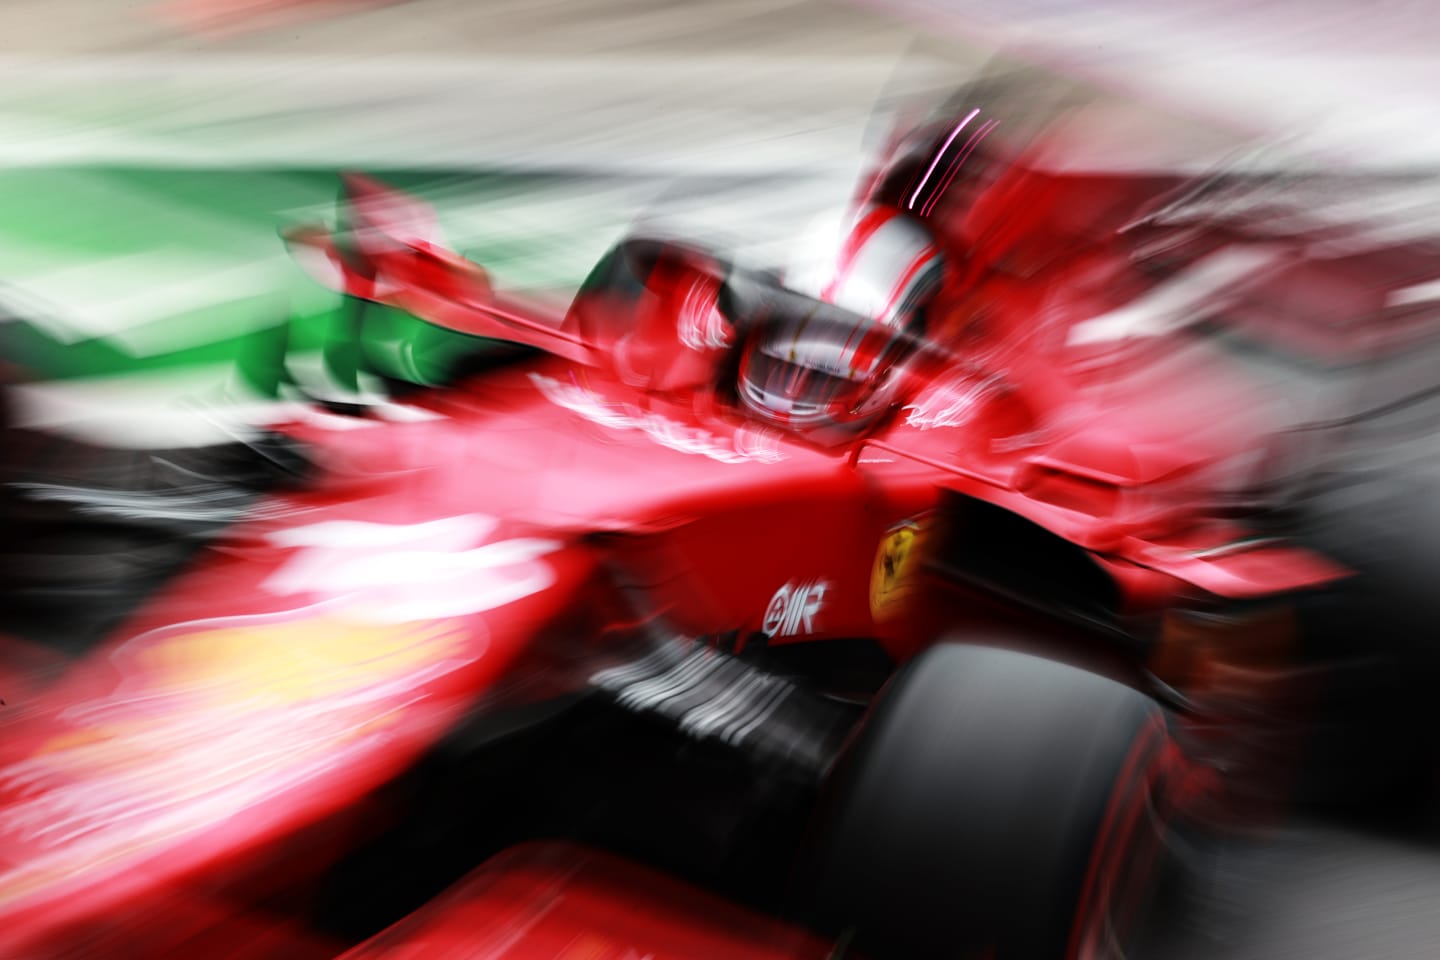 SPIELBERG, AUSTRIA - JUNE 25: Charles Leclerc of Monaco driving the (16) Scuderia Ferrari SF21 drives in the Pitlane during practice ahead of the F1 Grand Prix of Styria at Red Bull Ring on June 25, 2021 in Spielberg, Austria. (Photo by Mark Thompson/Getty Images)